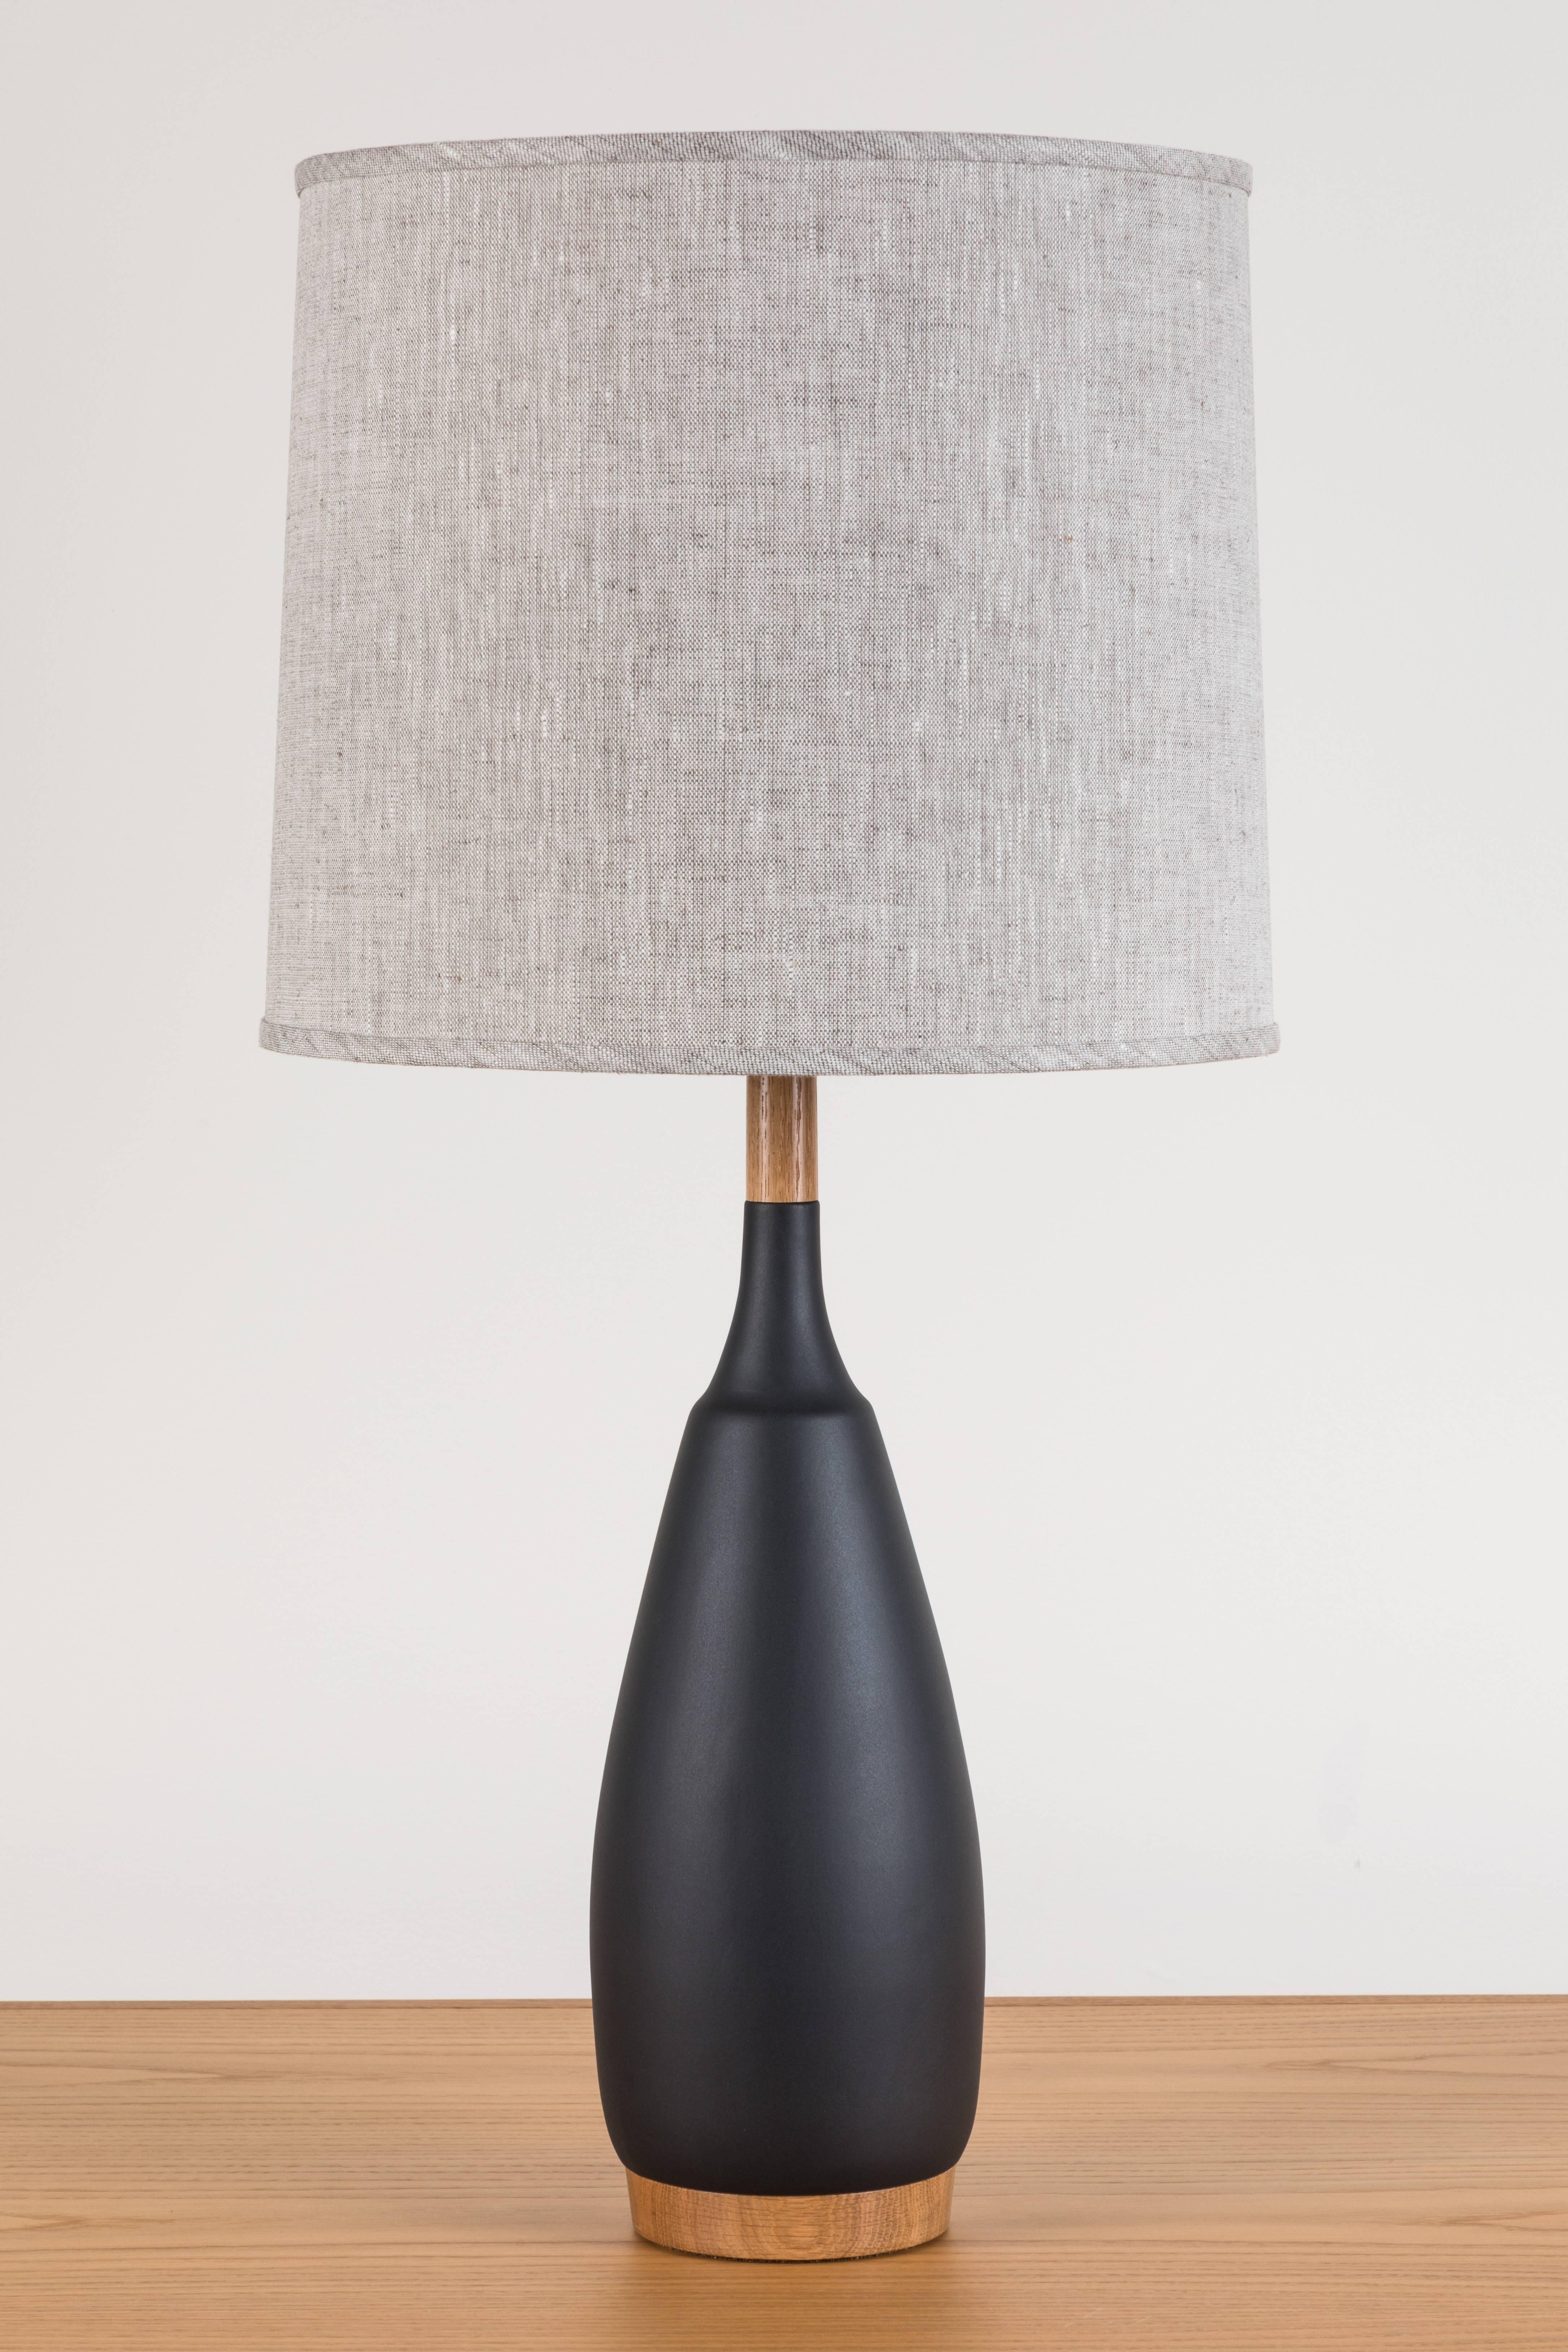 Pair of Lancaster lamps by Stone and Sawyer 

Available at Lawson-Fenning.